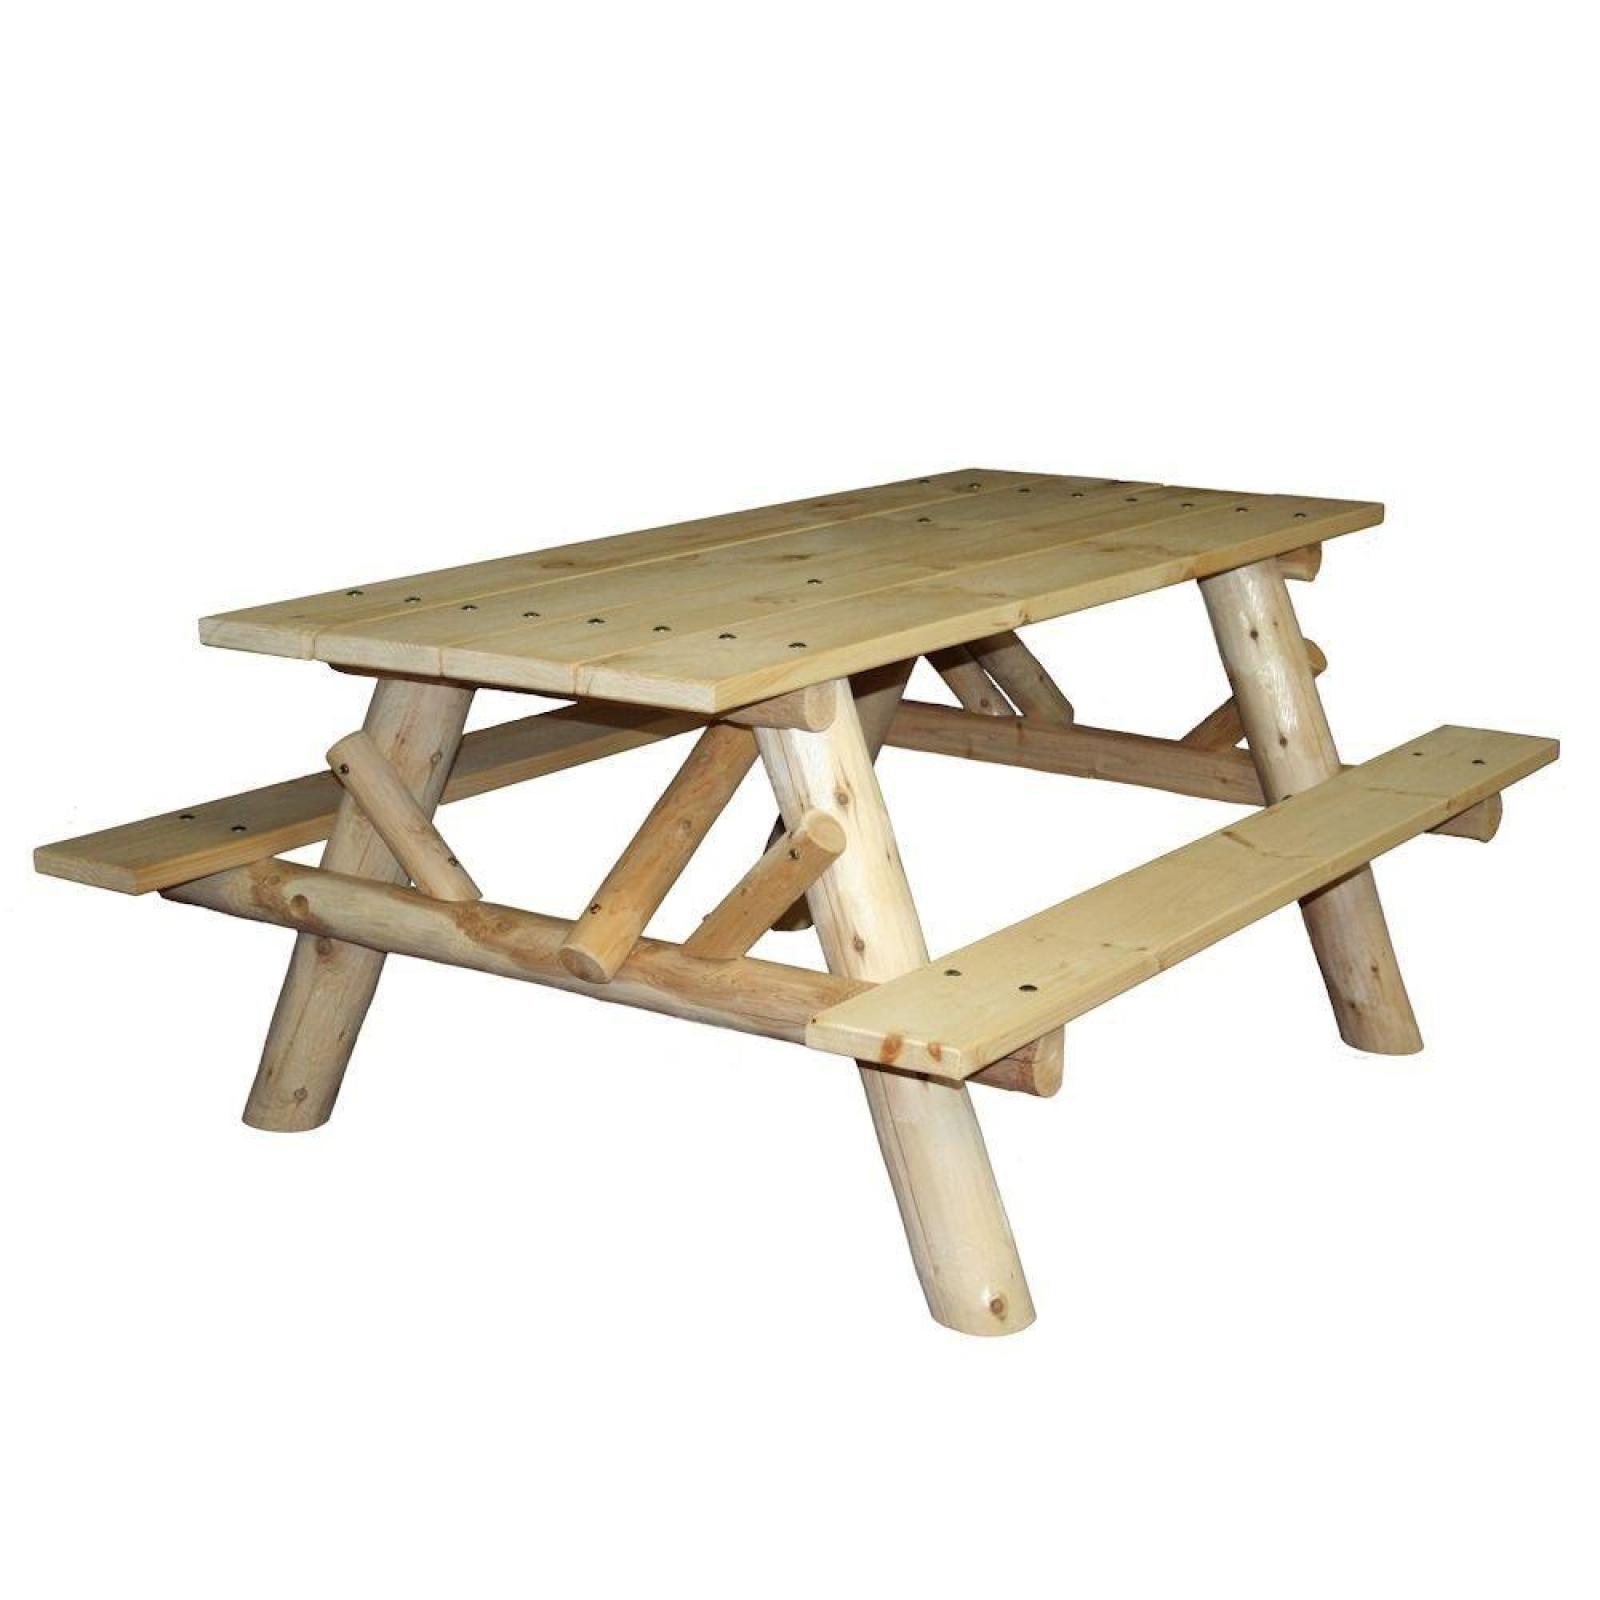 Log Picnic Table With Attached Benches